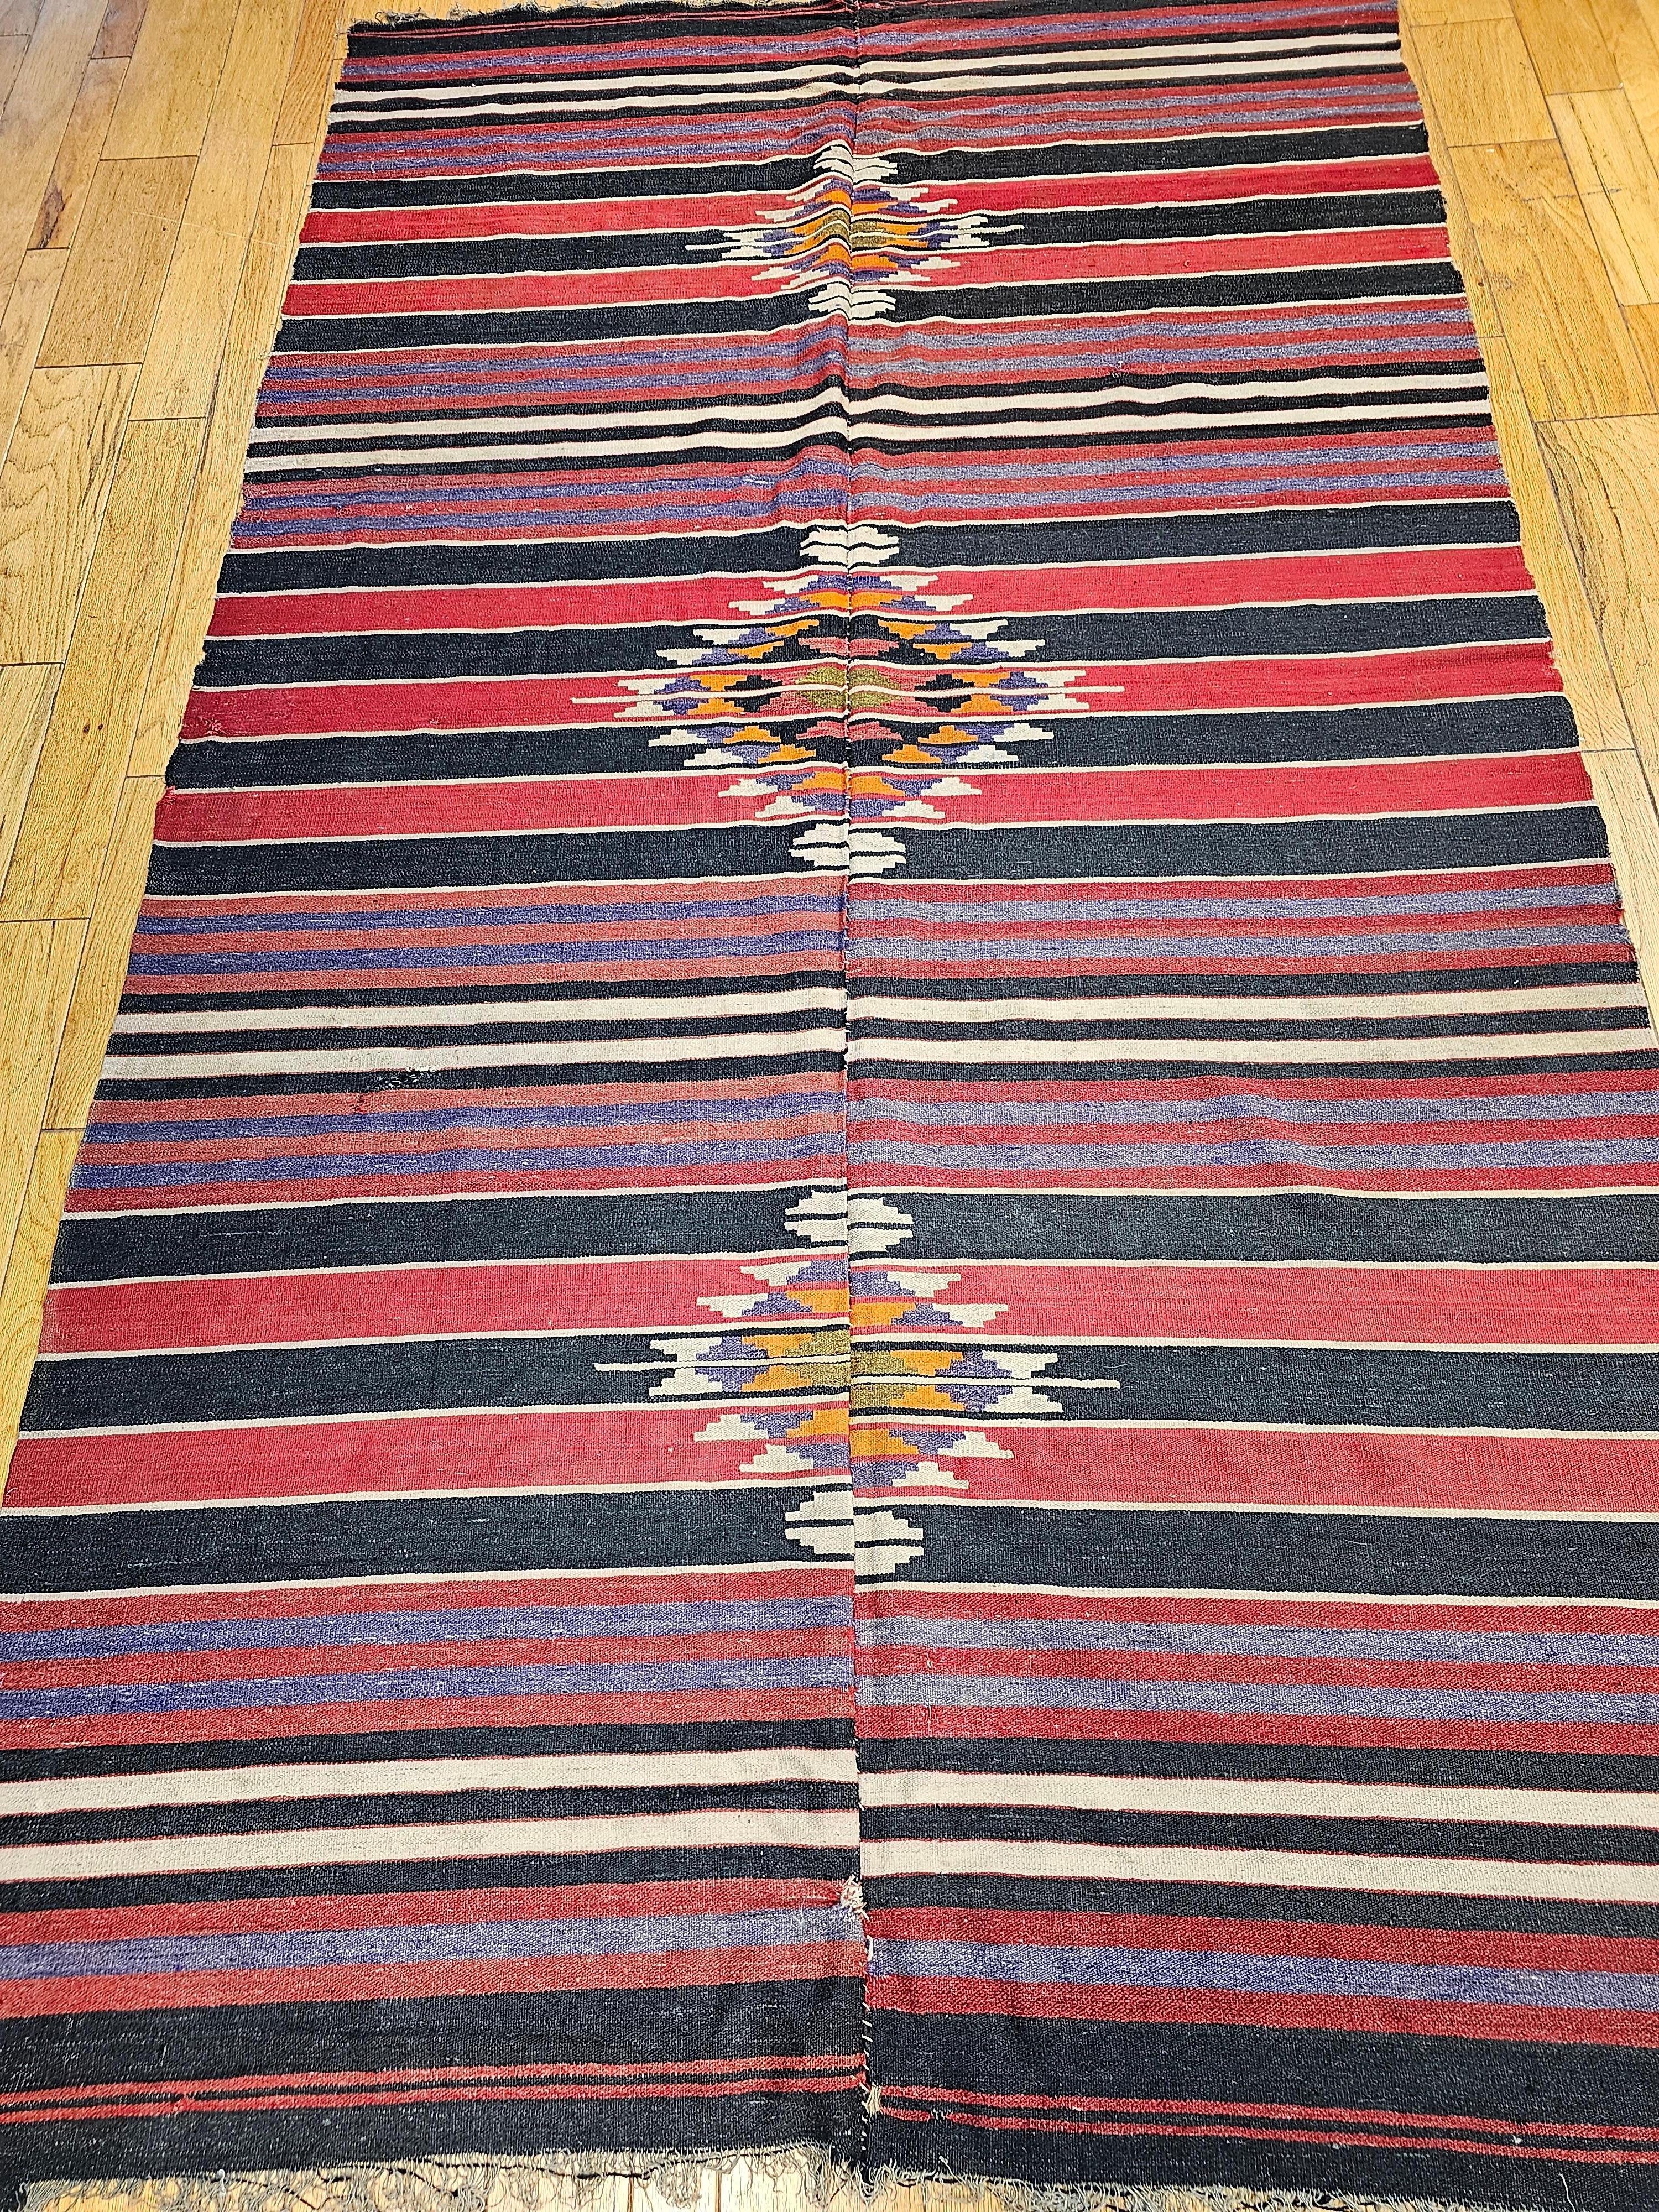 A beautiful mid century modern hand woven kilim with a stripe pattern and three small medallions.  The colors in the kilim including red, lavender, orange, and ivory represent the colors in the American Southwest landscape of mountains and canyons